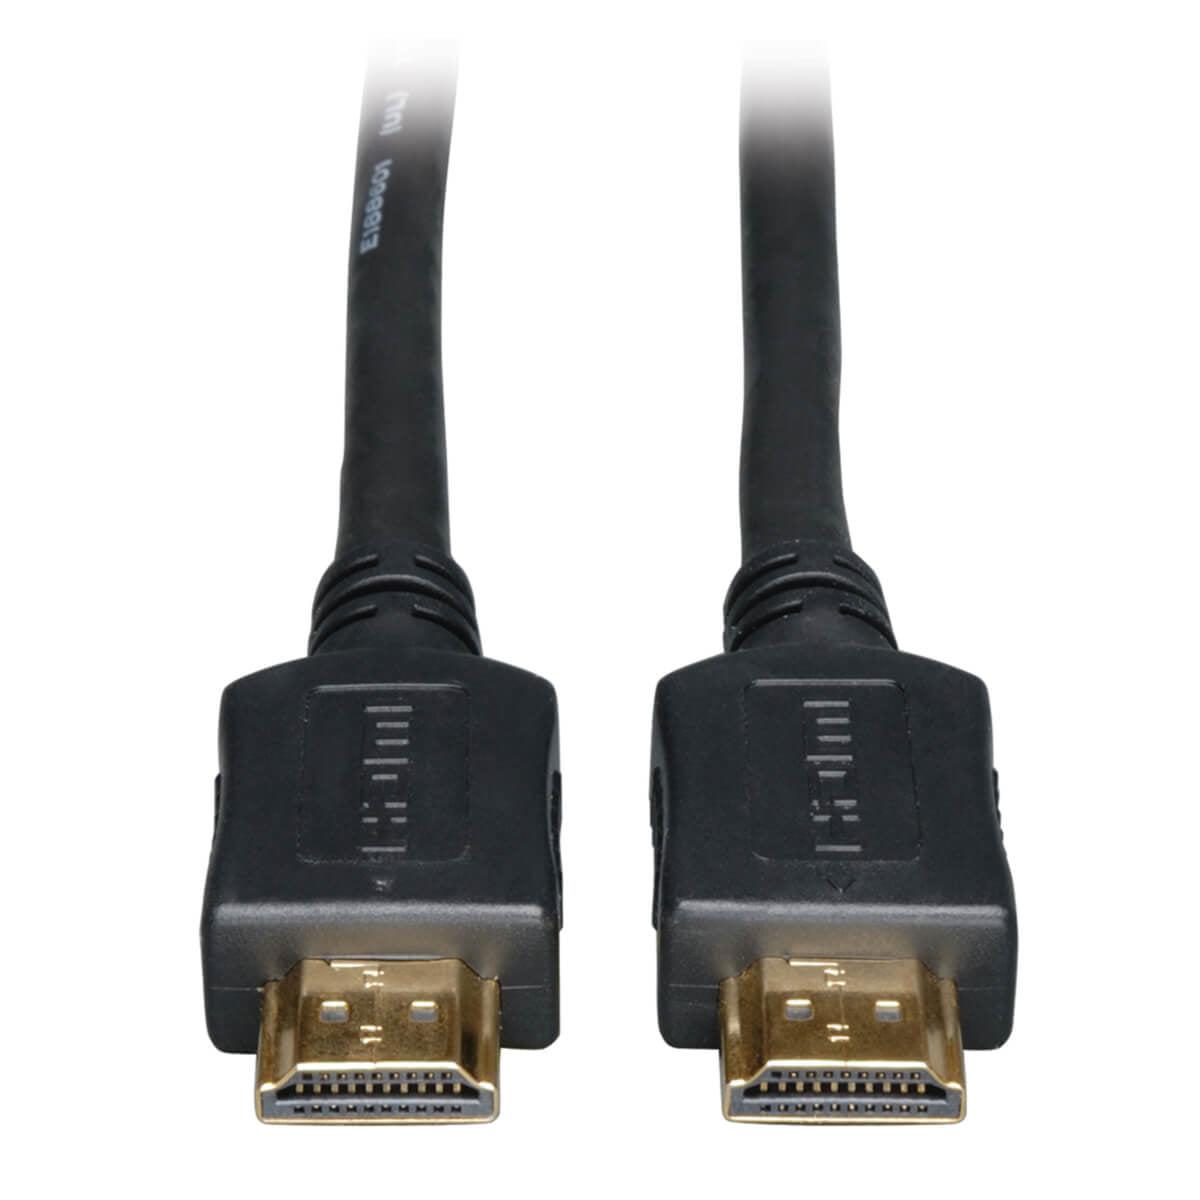 Tripp Lite P568-050-Hd High-Speed Hdmi Cable With Ethernet (M/M) - 4K, No Signal Booster Needed, Black, 50 Ft.